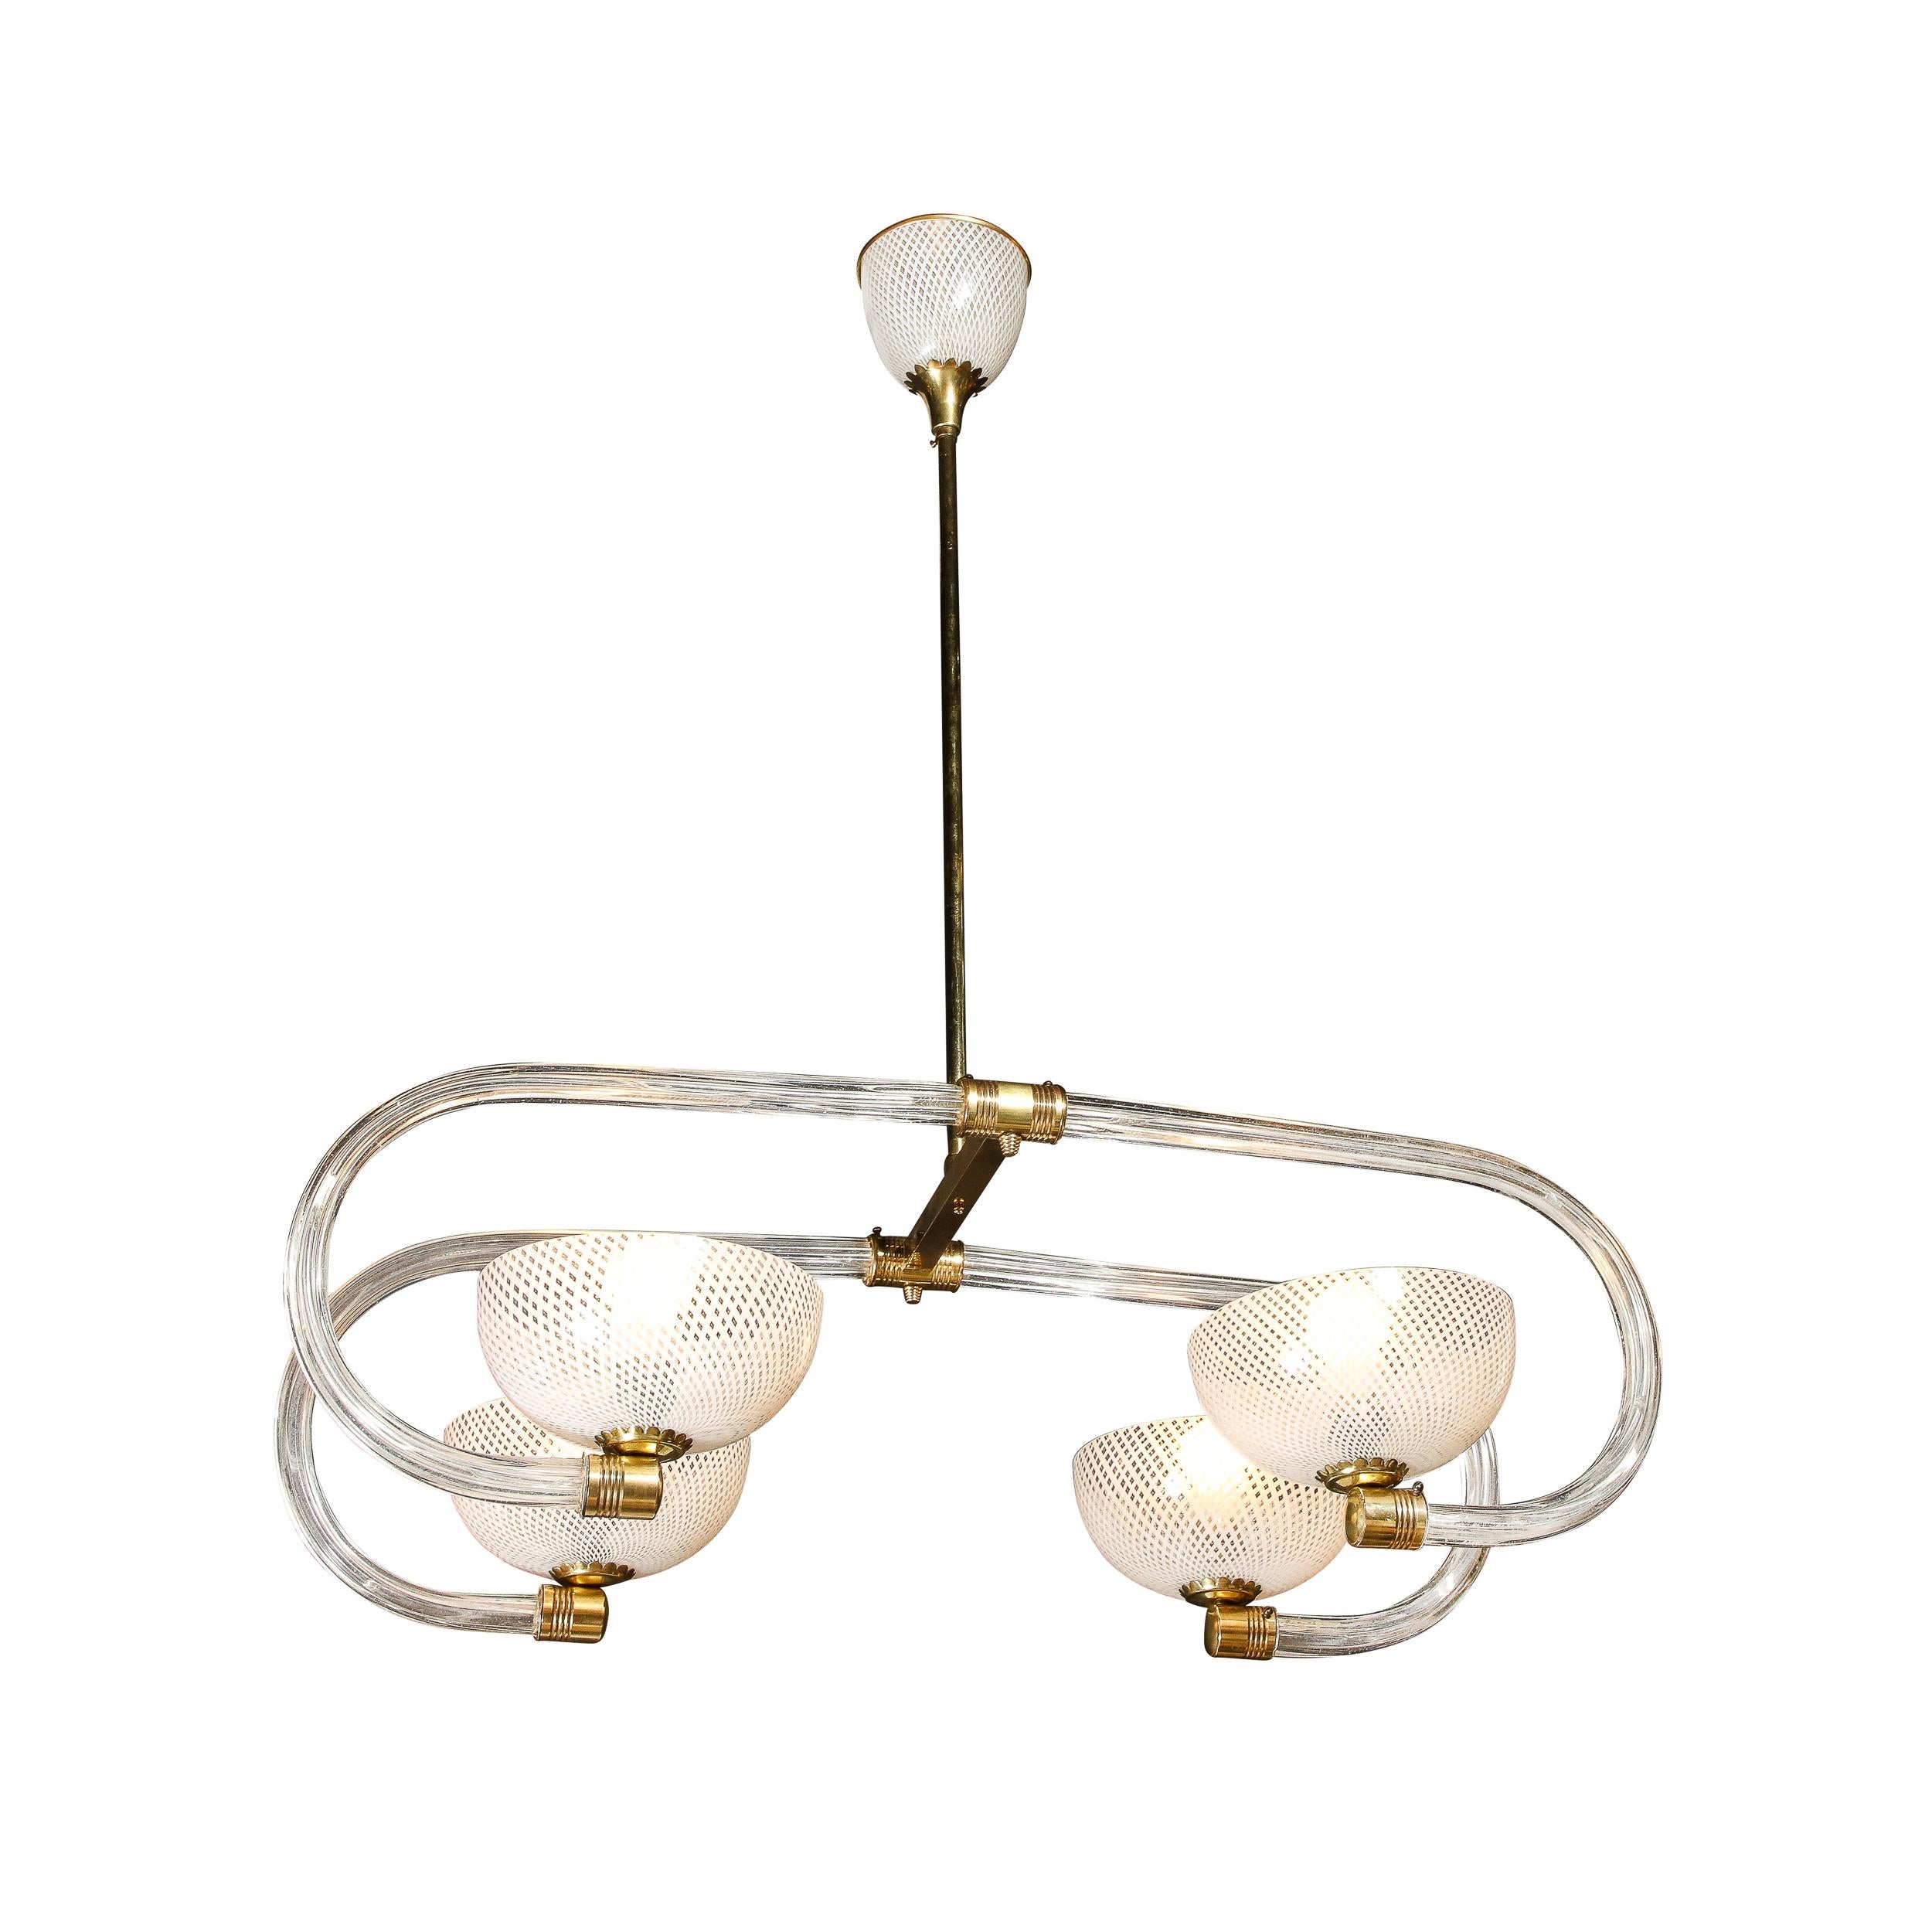 Italian Mid-Century Modernist Four Armed Glass & Brass Chandelier by Barovier & Toso For Sale